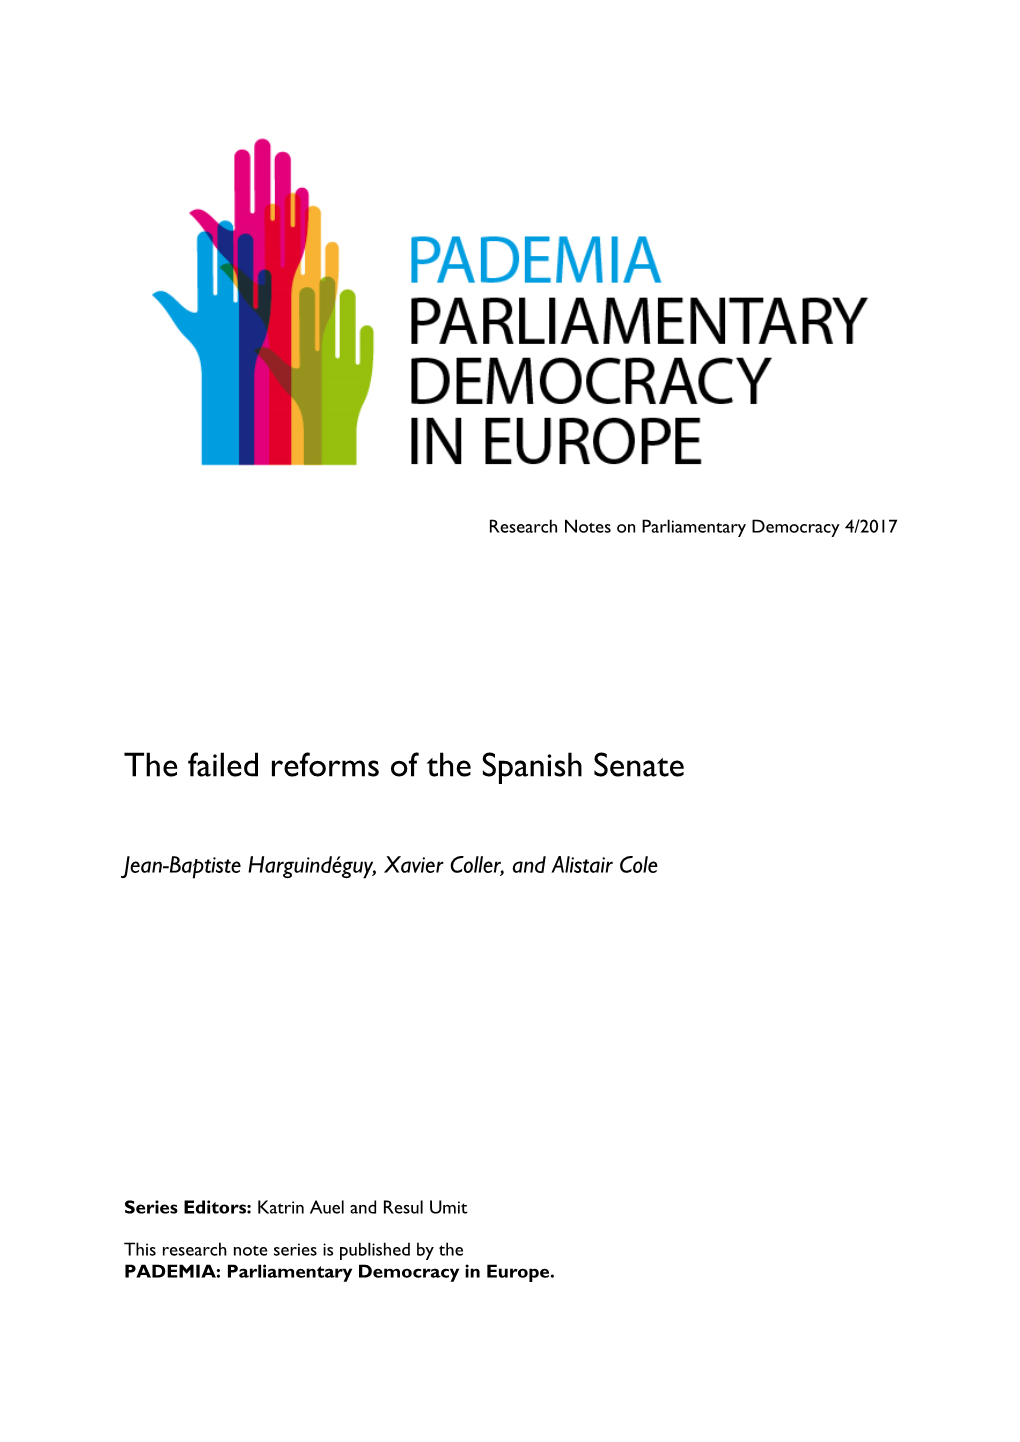 The Failed Reforms of the Spanish Senate